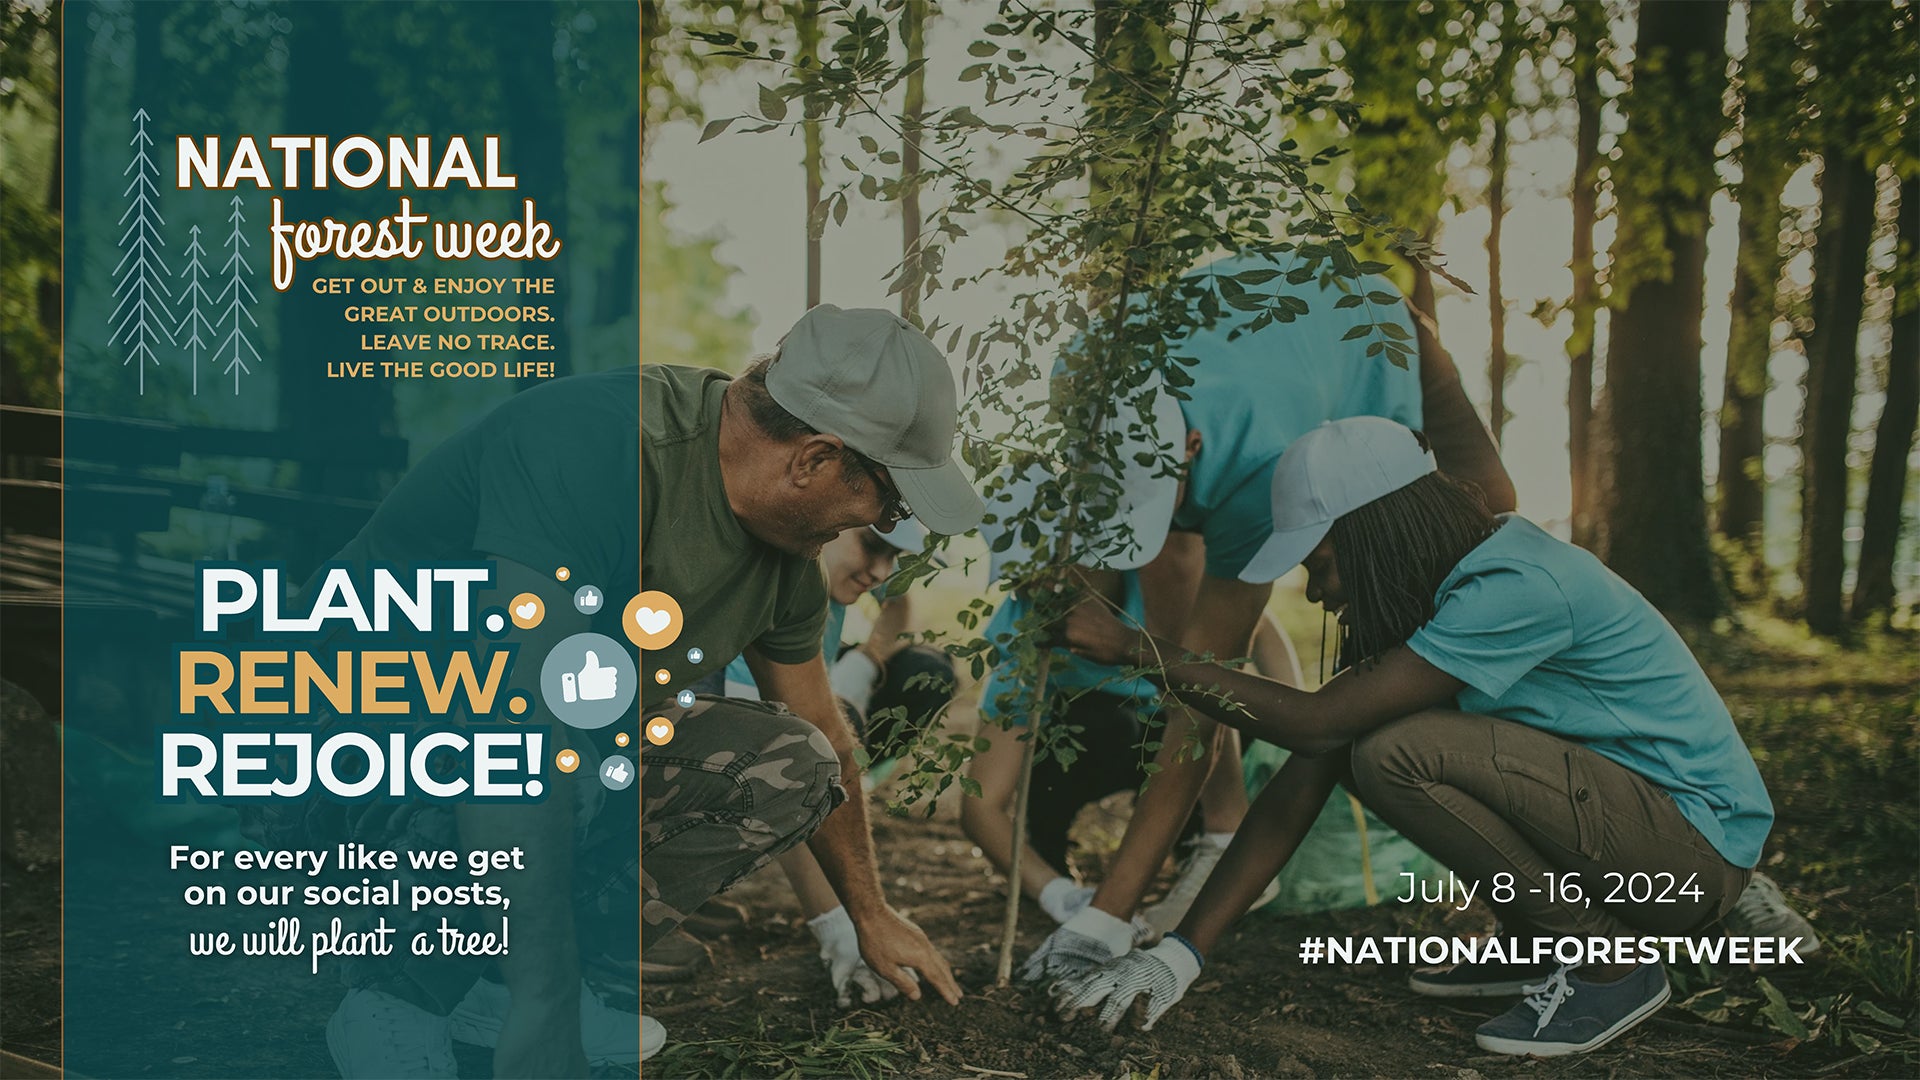 Narional Forest Week - Pant, Renew, Rejoice. 